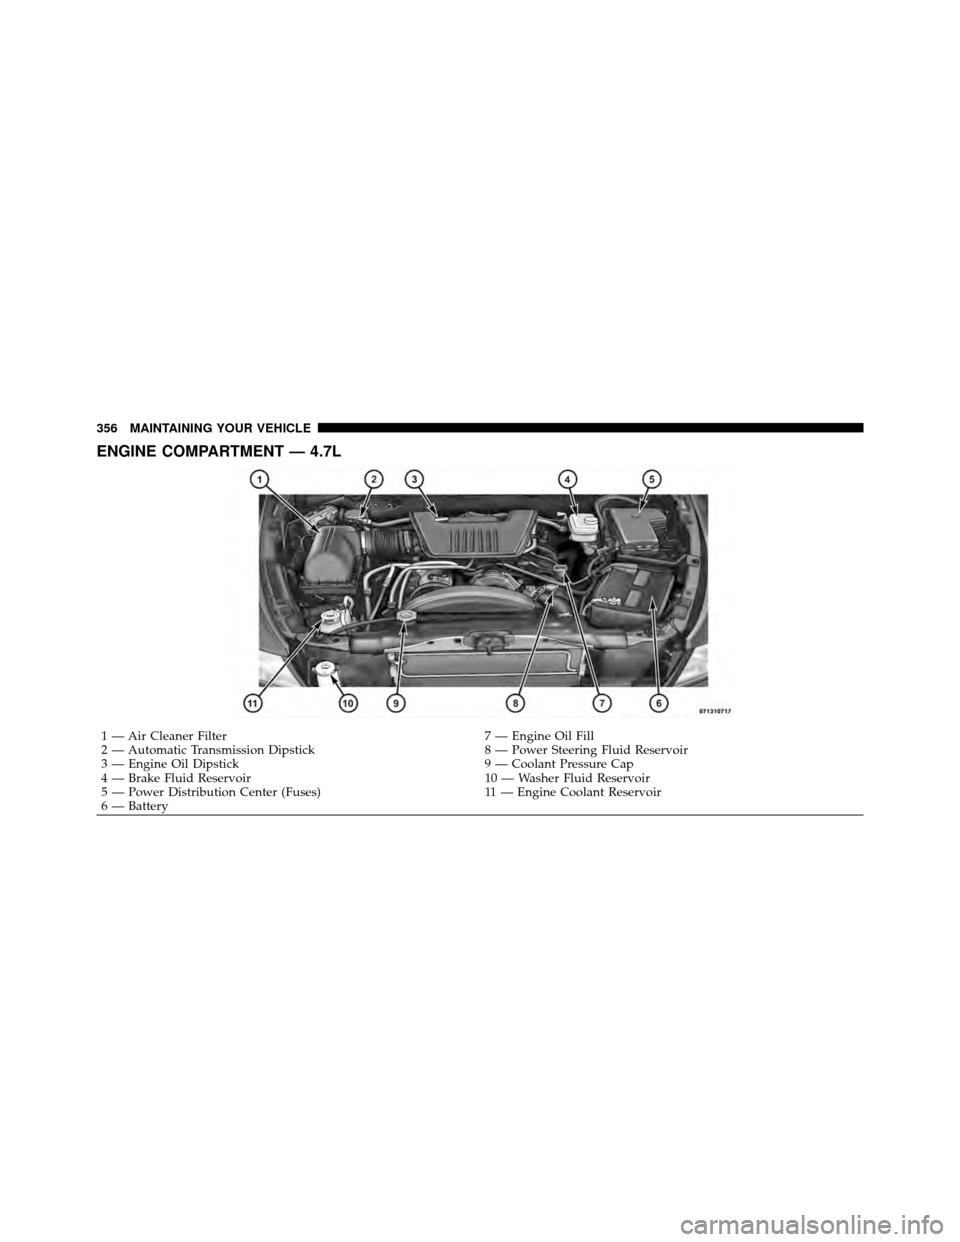 DODGE DAKOTA 2011 3.G Owners Manual ENGINE COMPARTMENT — 4.7L
1 — Air Cleaner Filter7 — Engine Oil Fill
2 — Automatic Transmission Dipstick 8 — Power Steering Fluid Reservoir
3 — Engine Oil Dipstick 9 — Coolant Pressure Ca